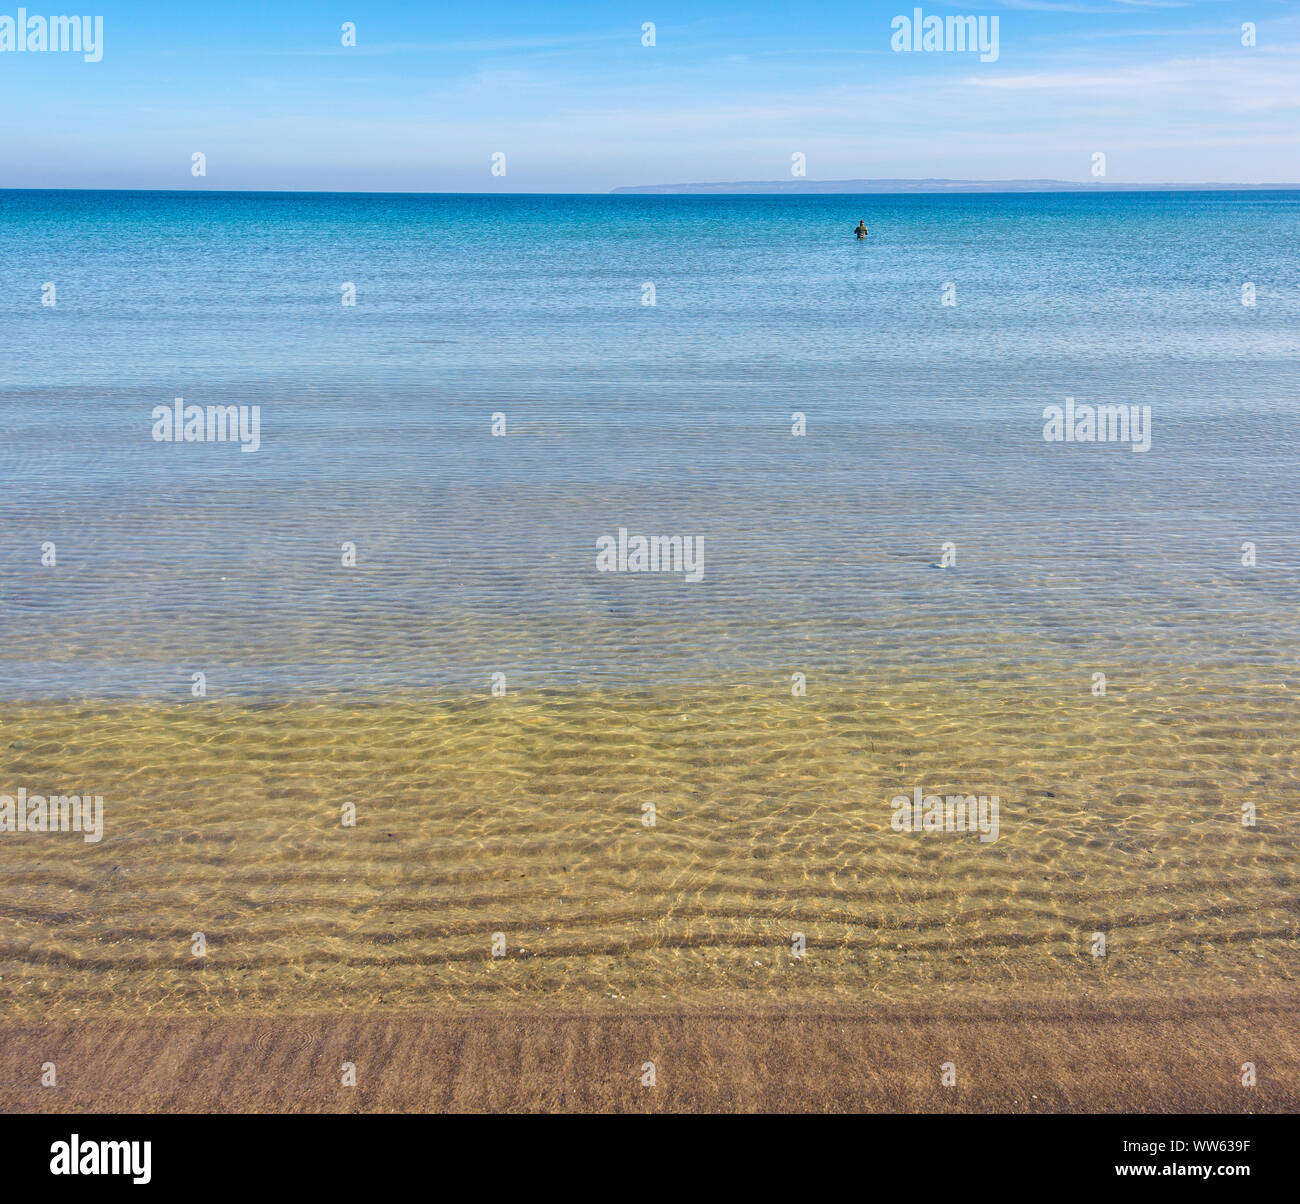 Lonesome angler in the sea Stock Photo